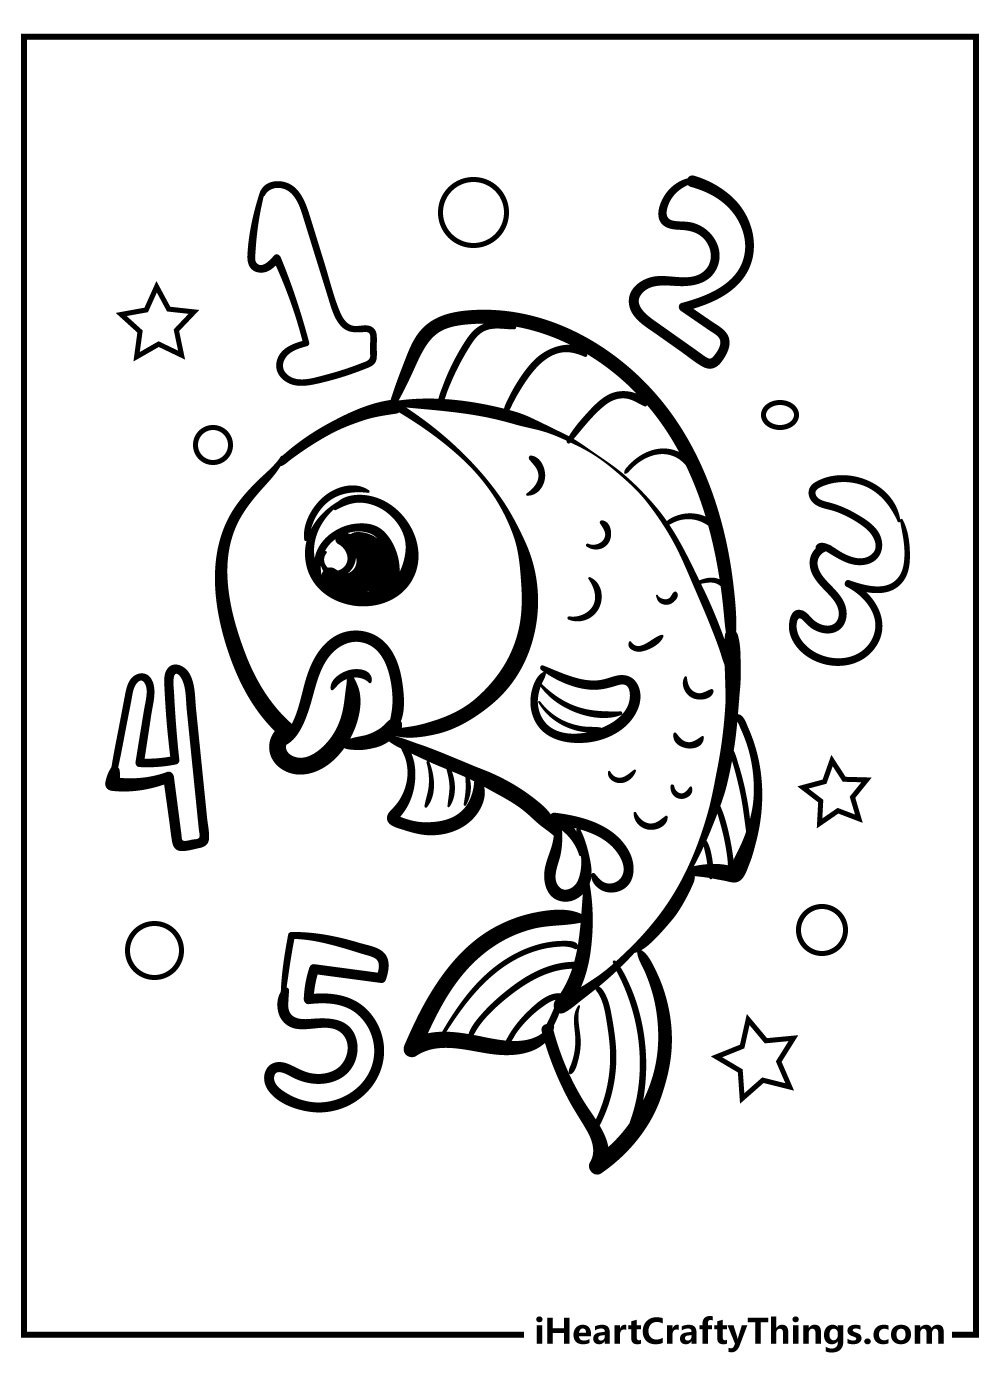 Free Coloring Pages For Toddlers Printable Home Design Ideas